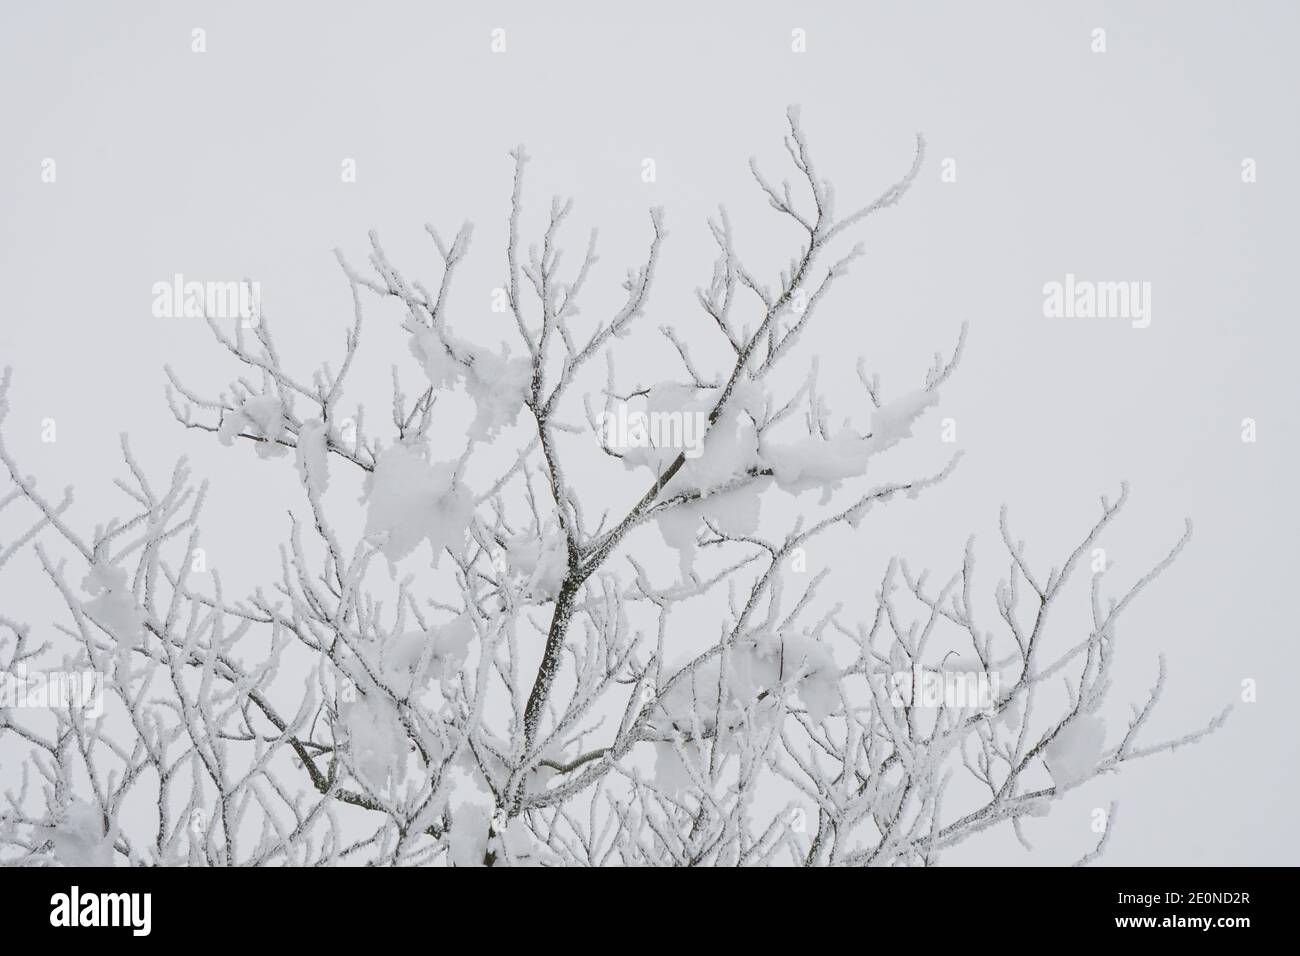 Mortara -12/29/2020: tree branches covered with snow Stock Photo